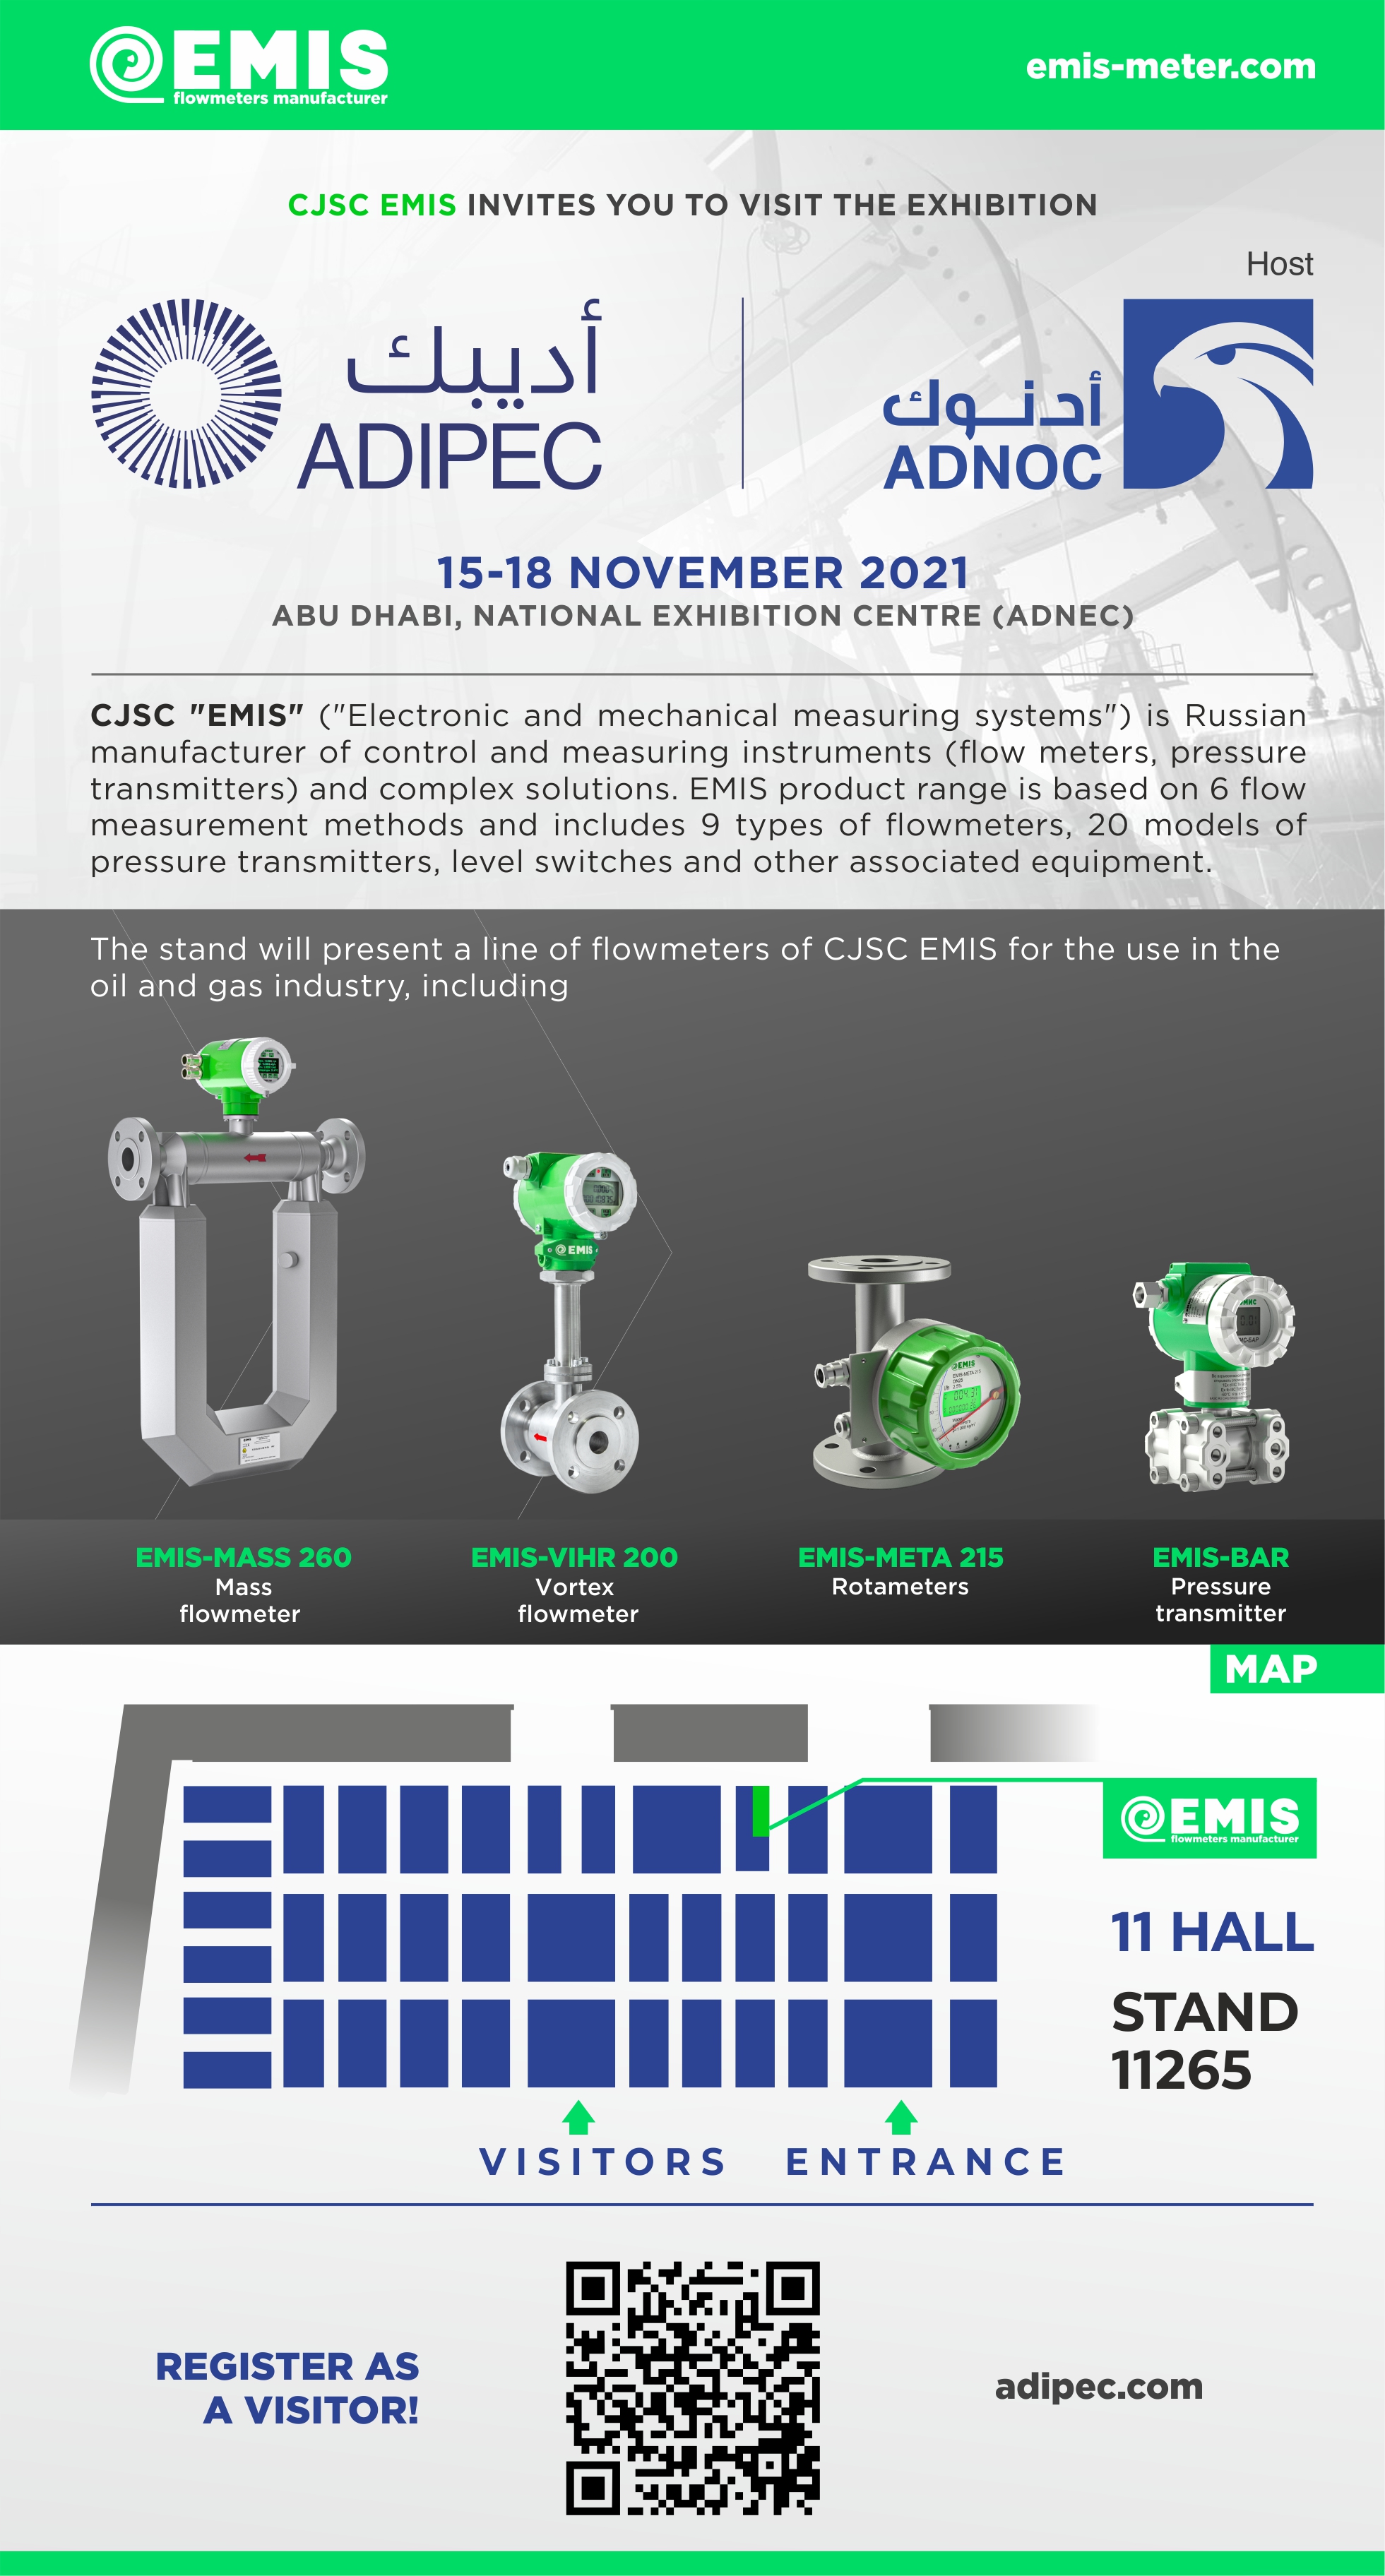 We invite you to visit EMIS stand (11265) at ADIPEC